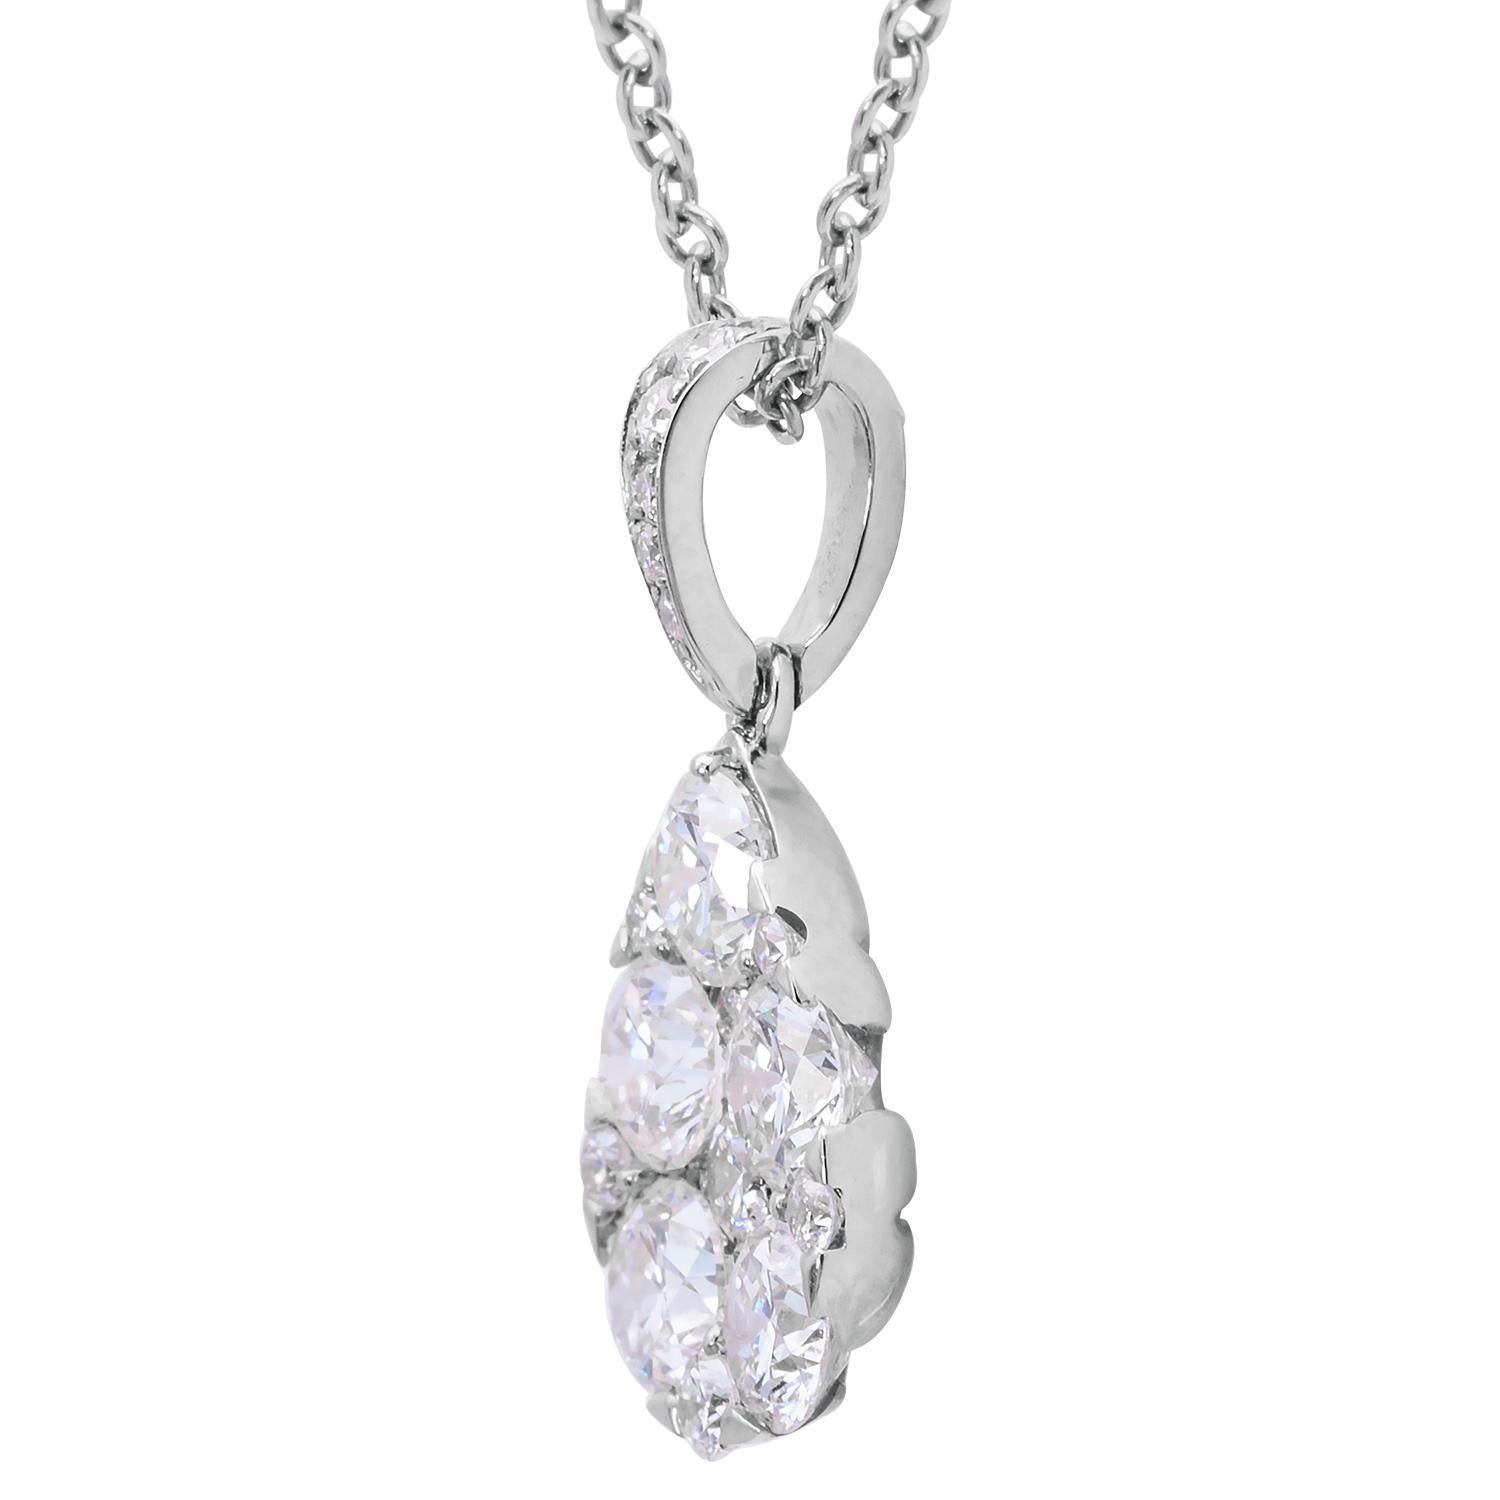 This stunning diamond pendant is made from 17 VS2, G color diamonds, totaling 1.02 carats, which form a teardrop shape, hung from a diamond-covered bail. The diamonds are set in 1.0 grams of 14 karat white gold. This beautiful pendant is hung from